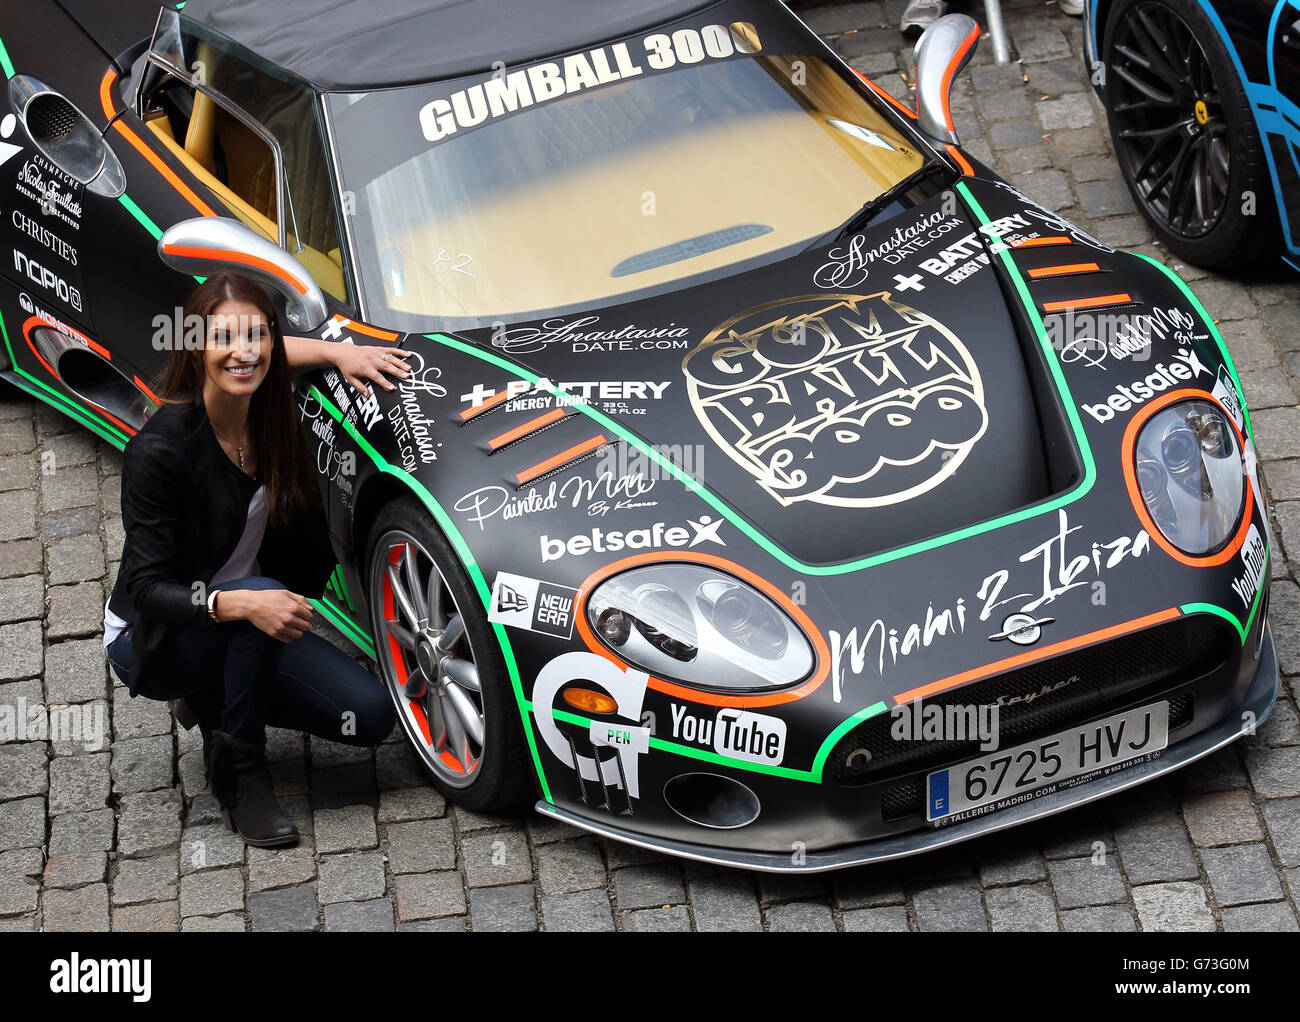 Former Miss Scotland Nicola Wood attends a photocall as supercars assembled outside The Rutland Hotel, Edinburgh, as Gumball 3000 rally drivers display their vehicles in celebration of the event's first trip to the city. Stock Photo